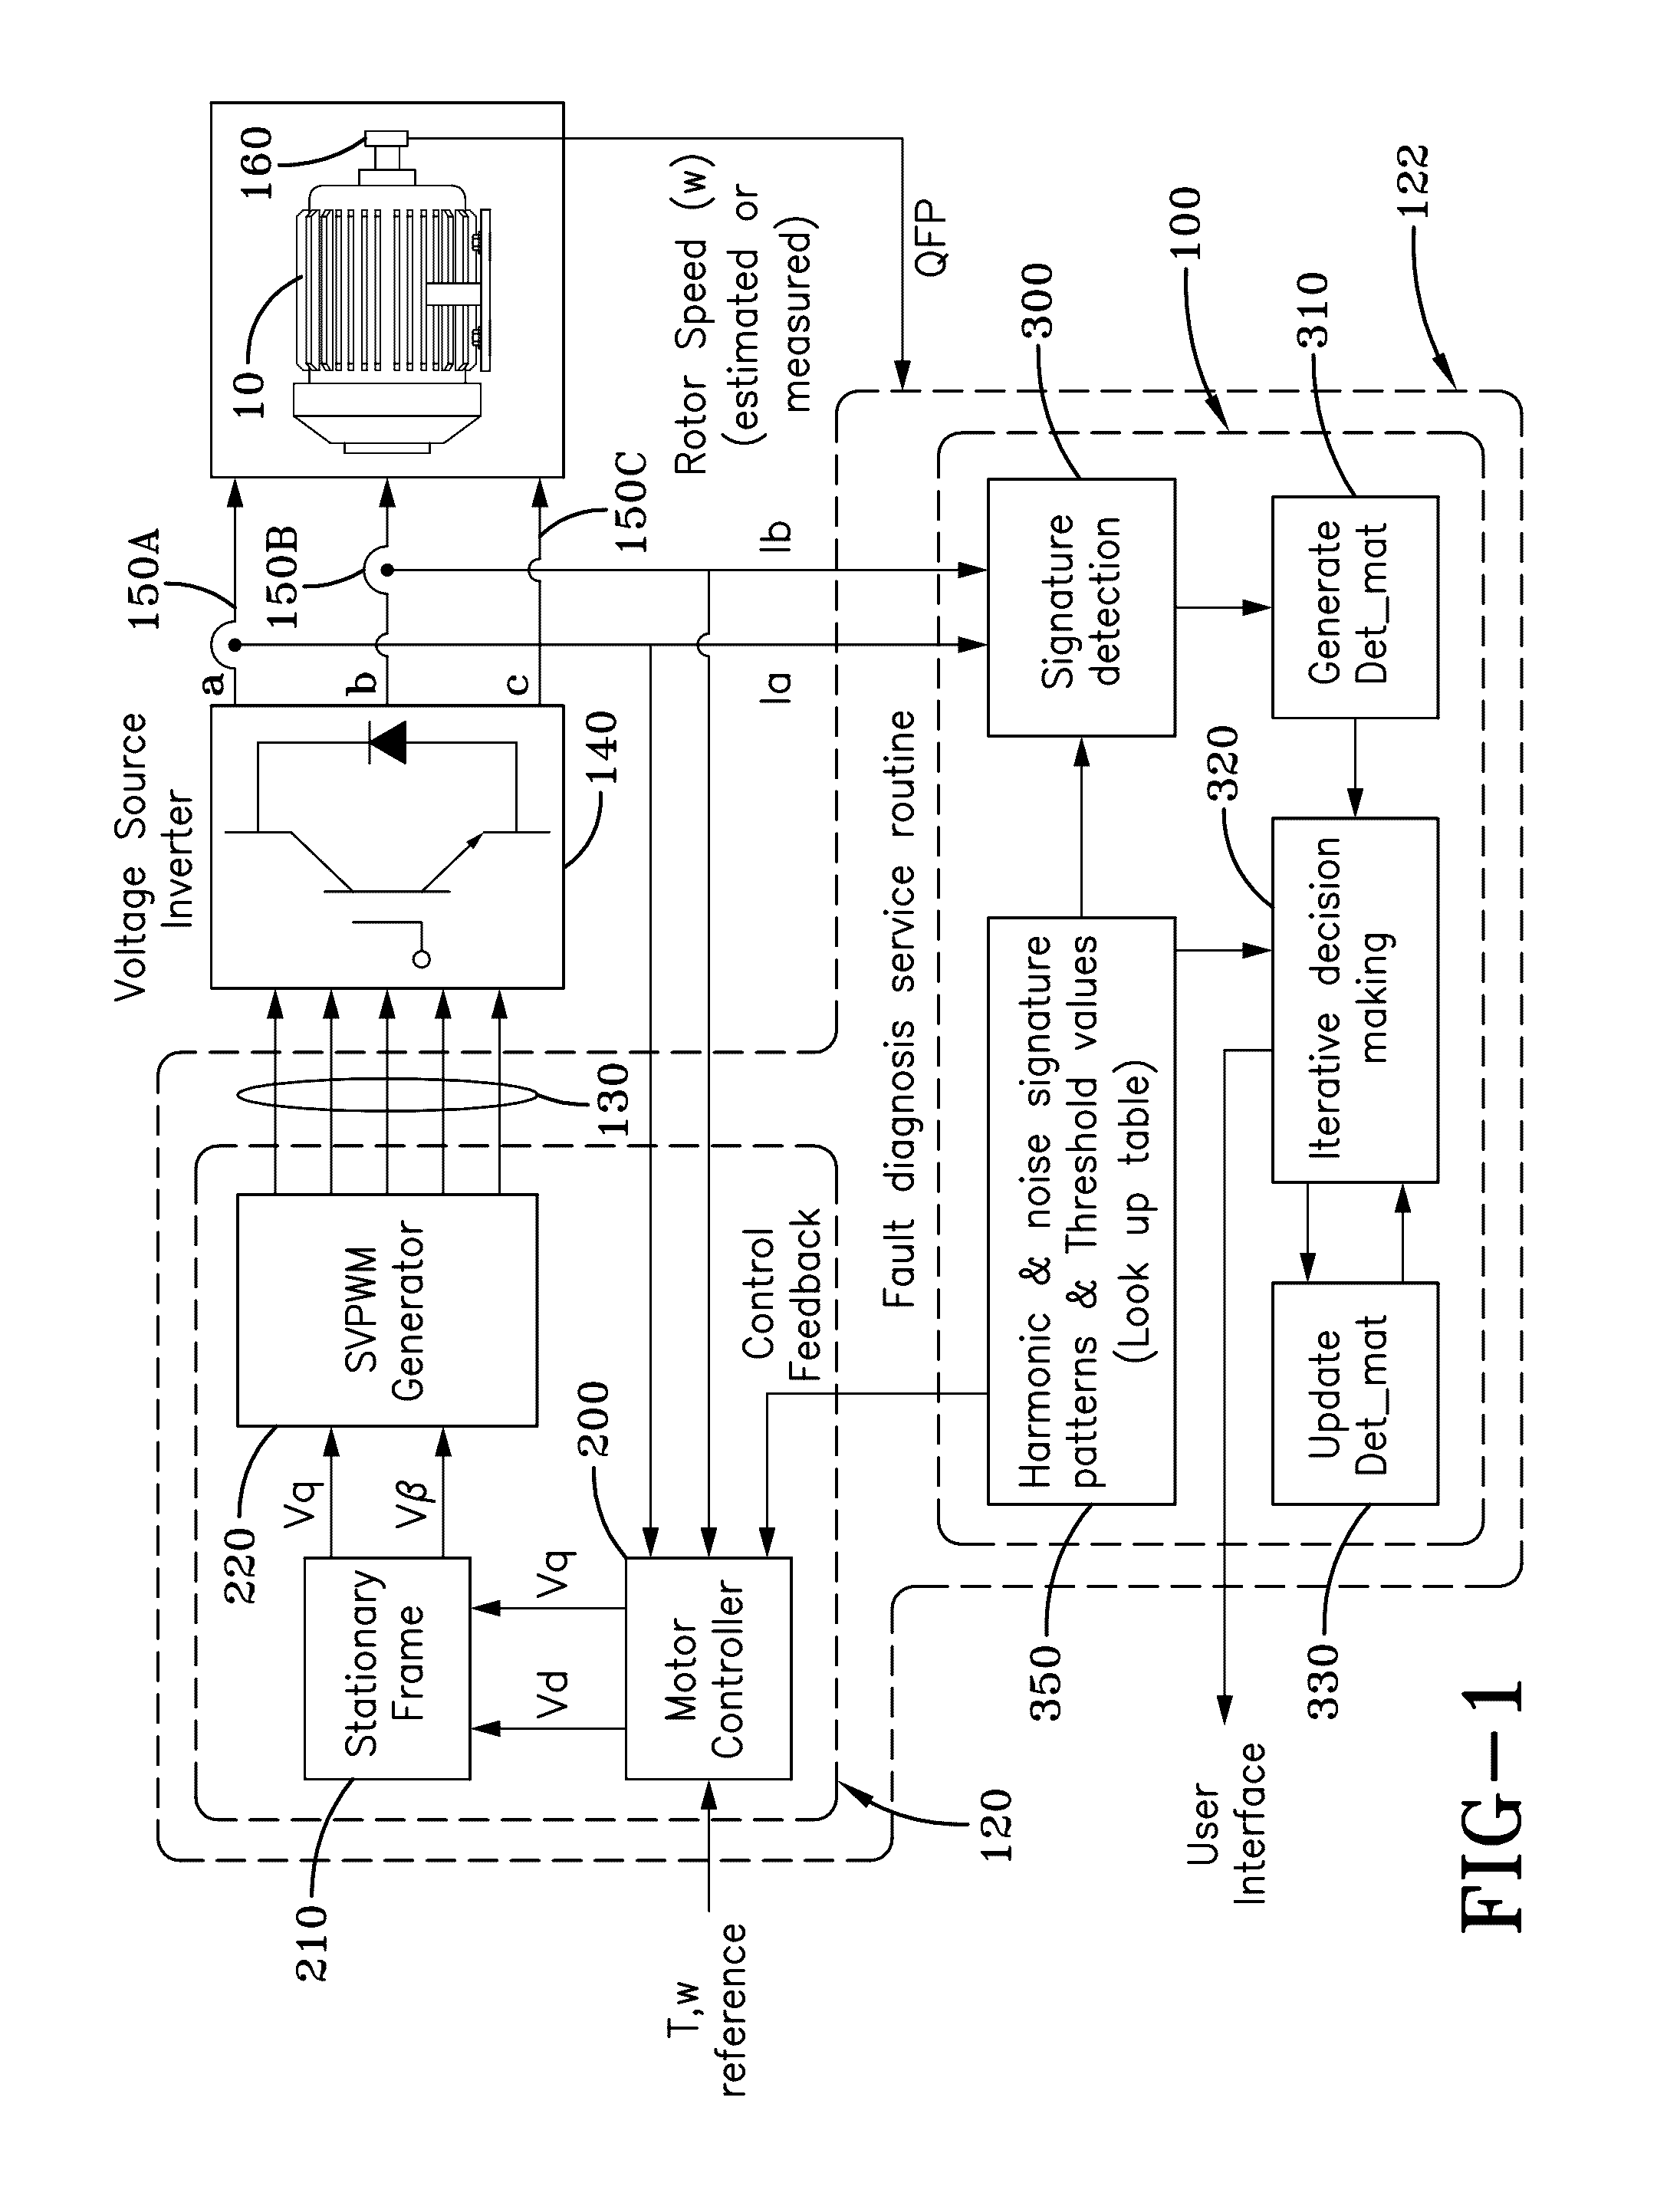 System and method for iterative condition monitoring and fault diagnosis of electric machines